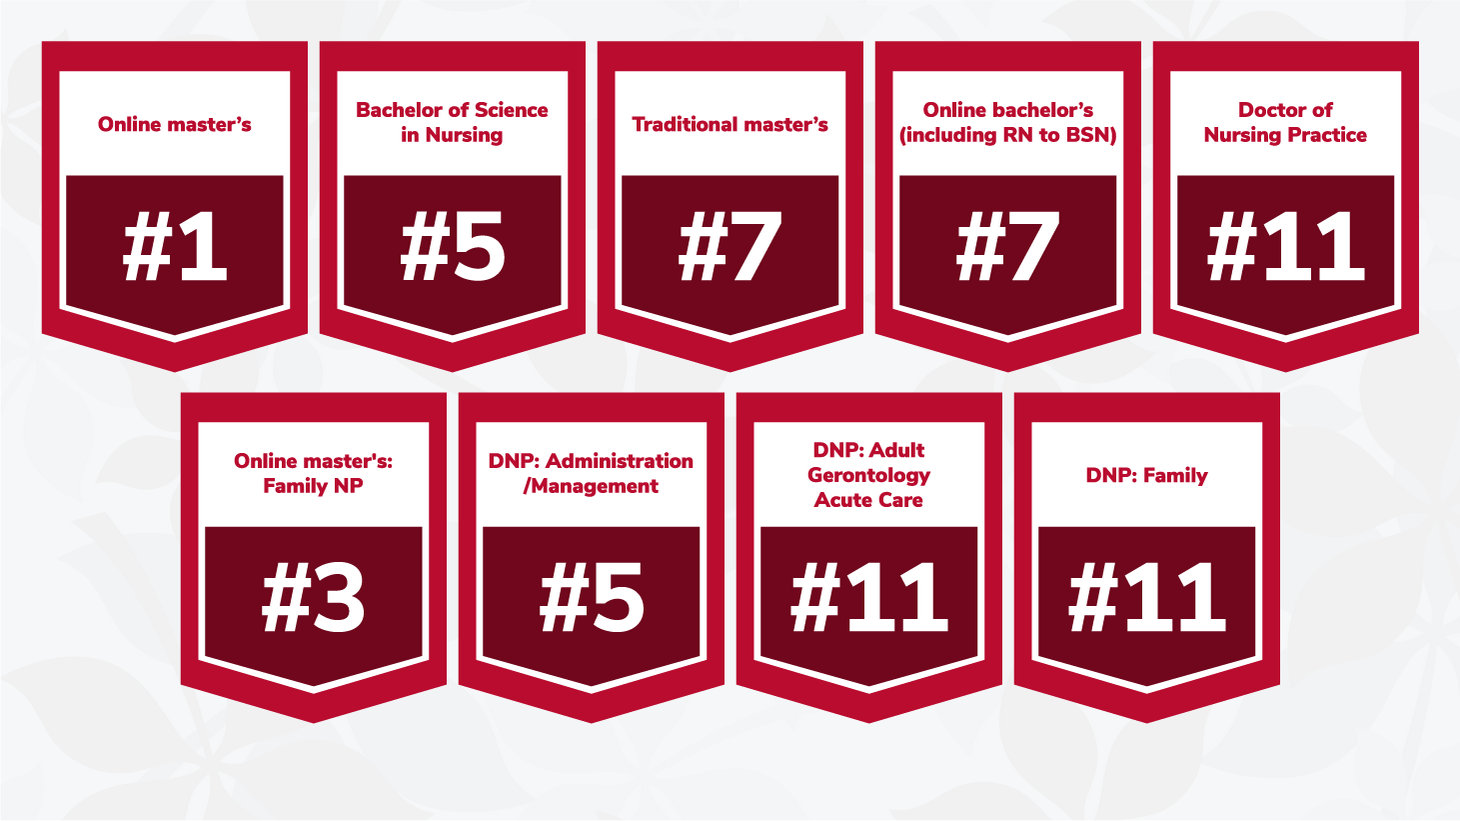 College of Nursing Rankings, About the College of Nursing